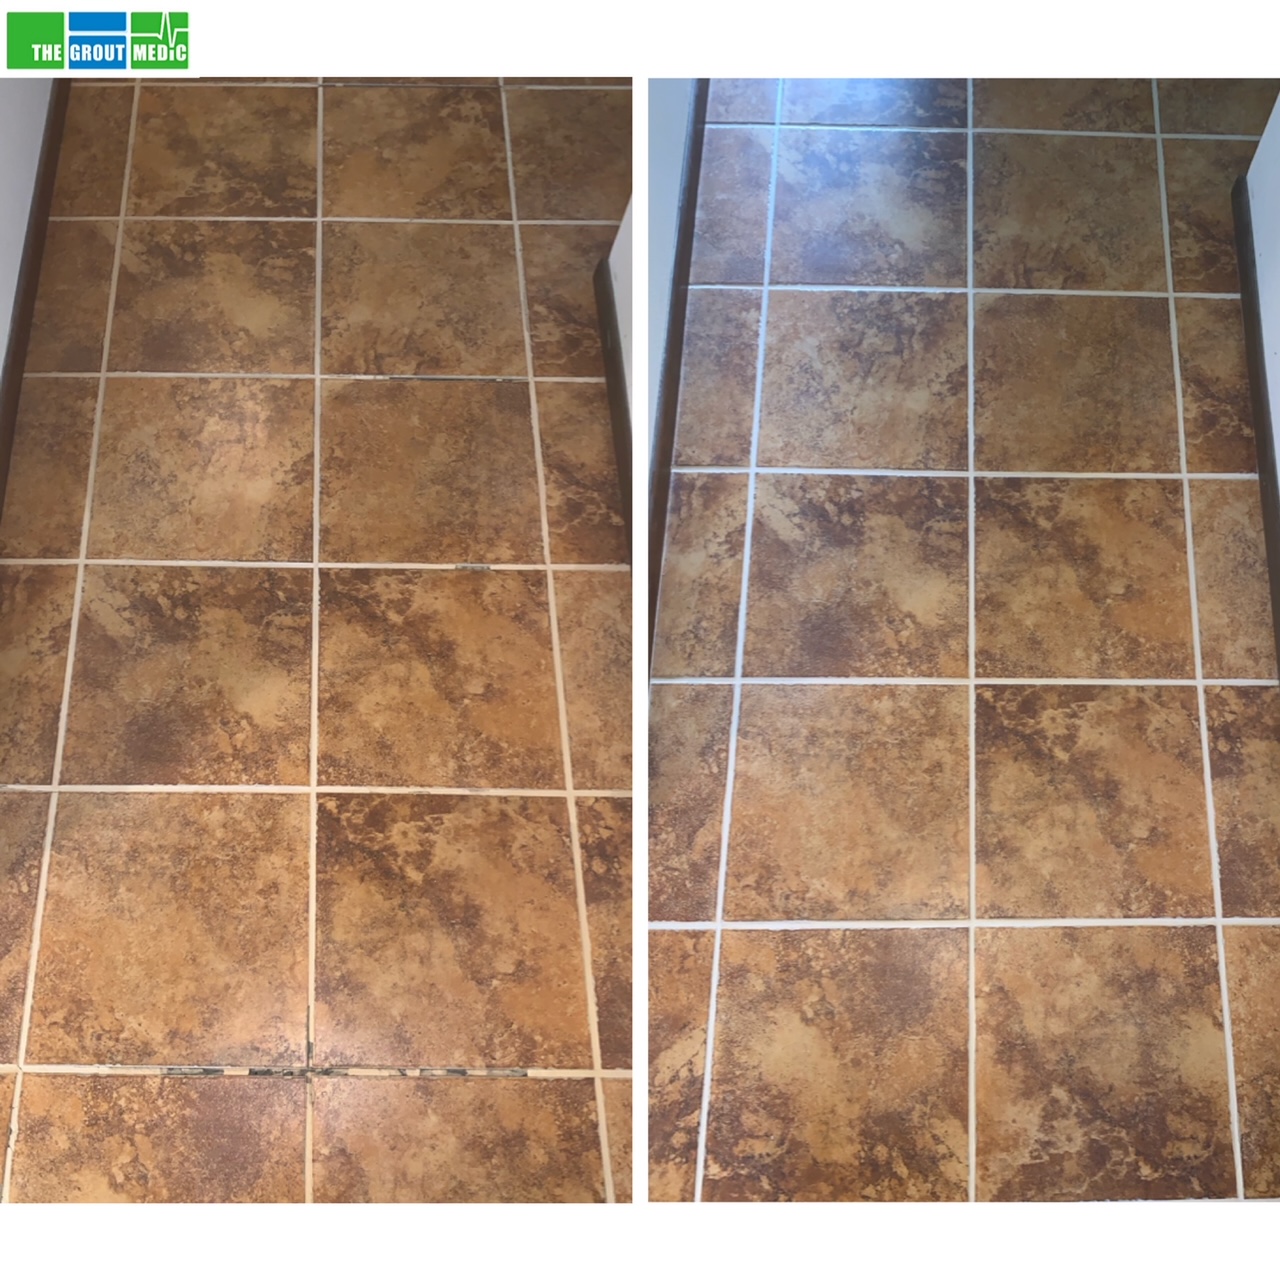 grout cleaning in St. Louis MO by The Grout Medic